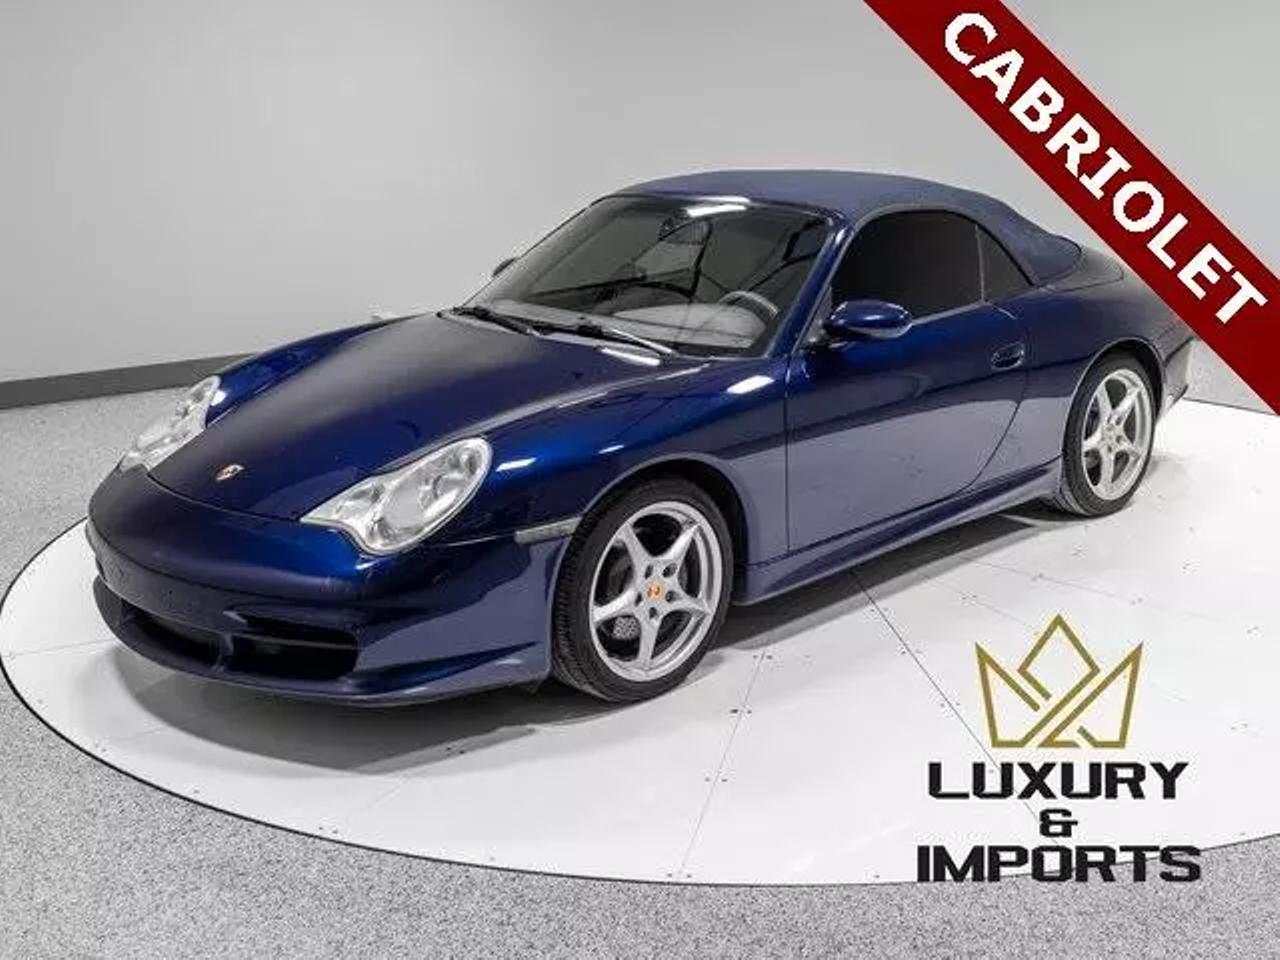 Porsche 911 996 Carrera 4 Cabriolet for sale | Used 911 996 Carrera 4  Cabriolet near you in the US | CarBuzz